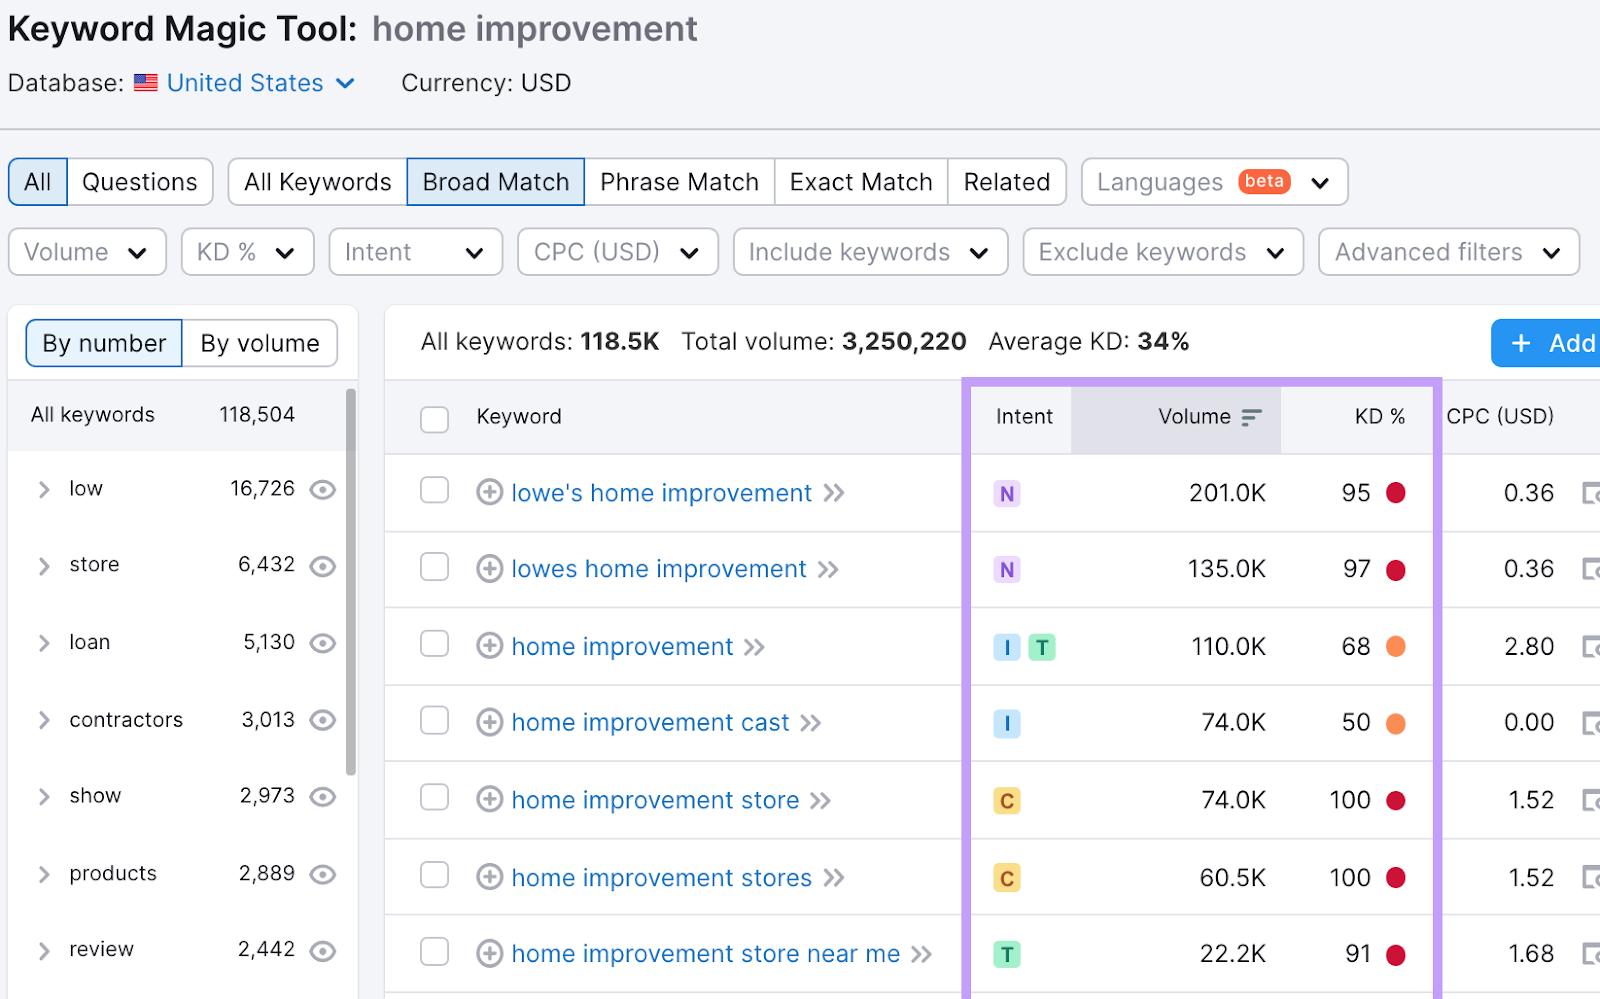 Keyword magic tool dashboard overview showing keywords related to the keyword 'home improvement’.